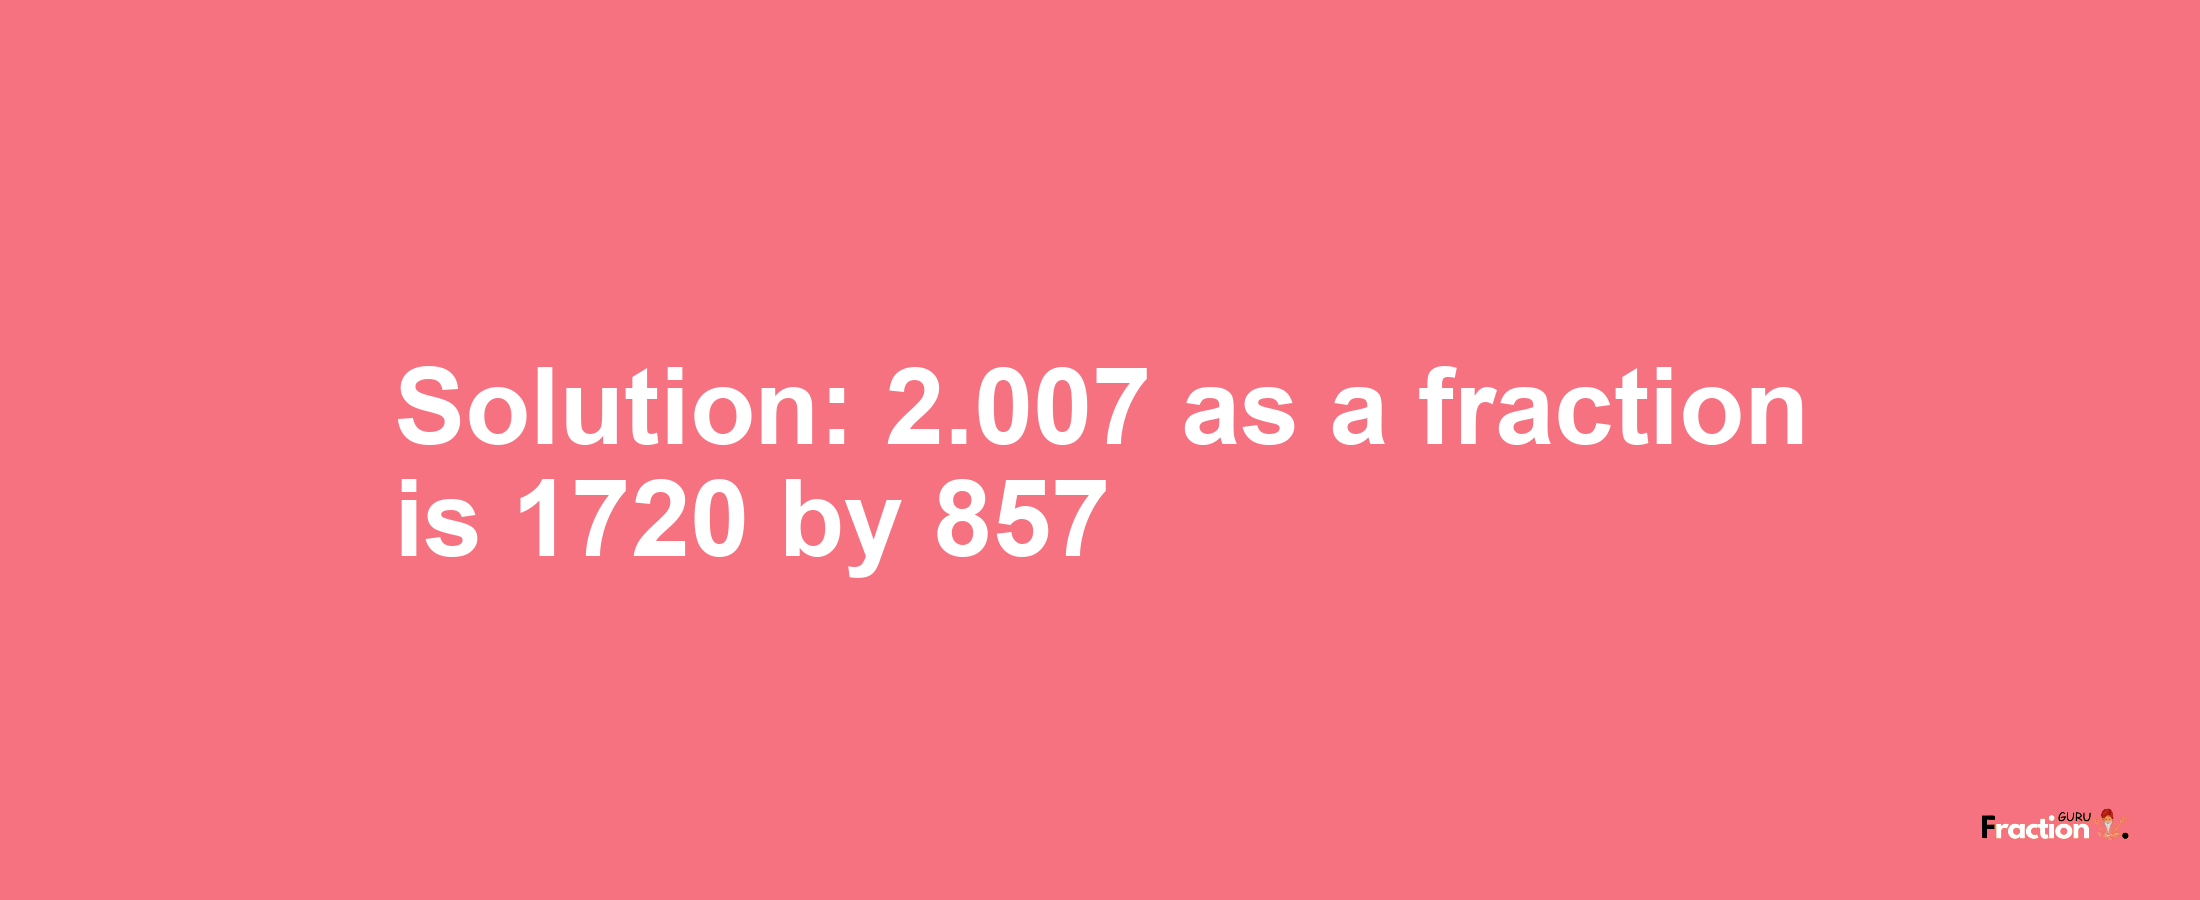 Solution:2.007 as a fraction is 1720/857